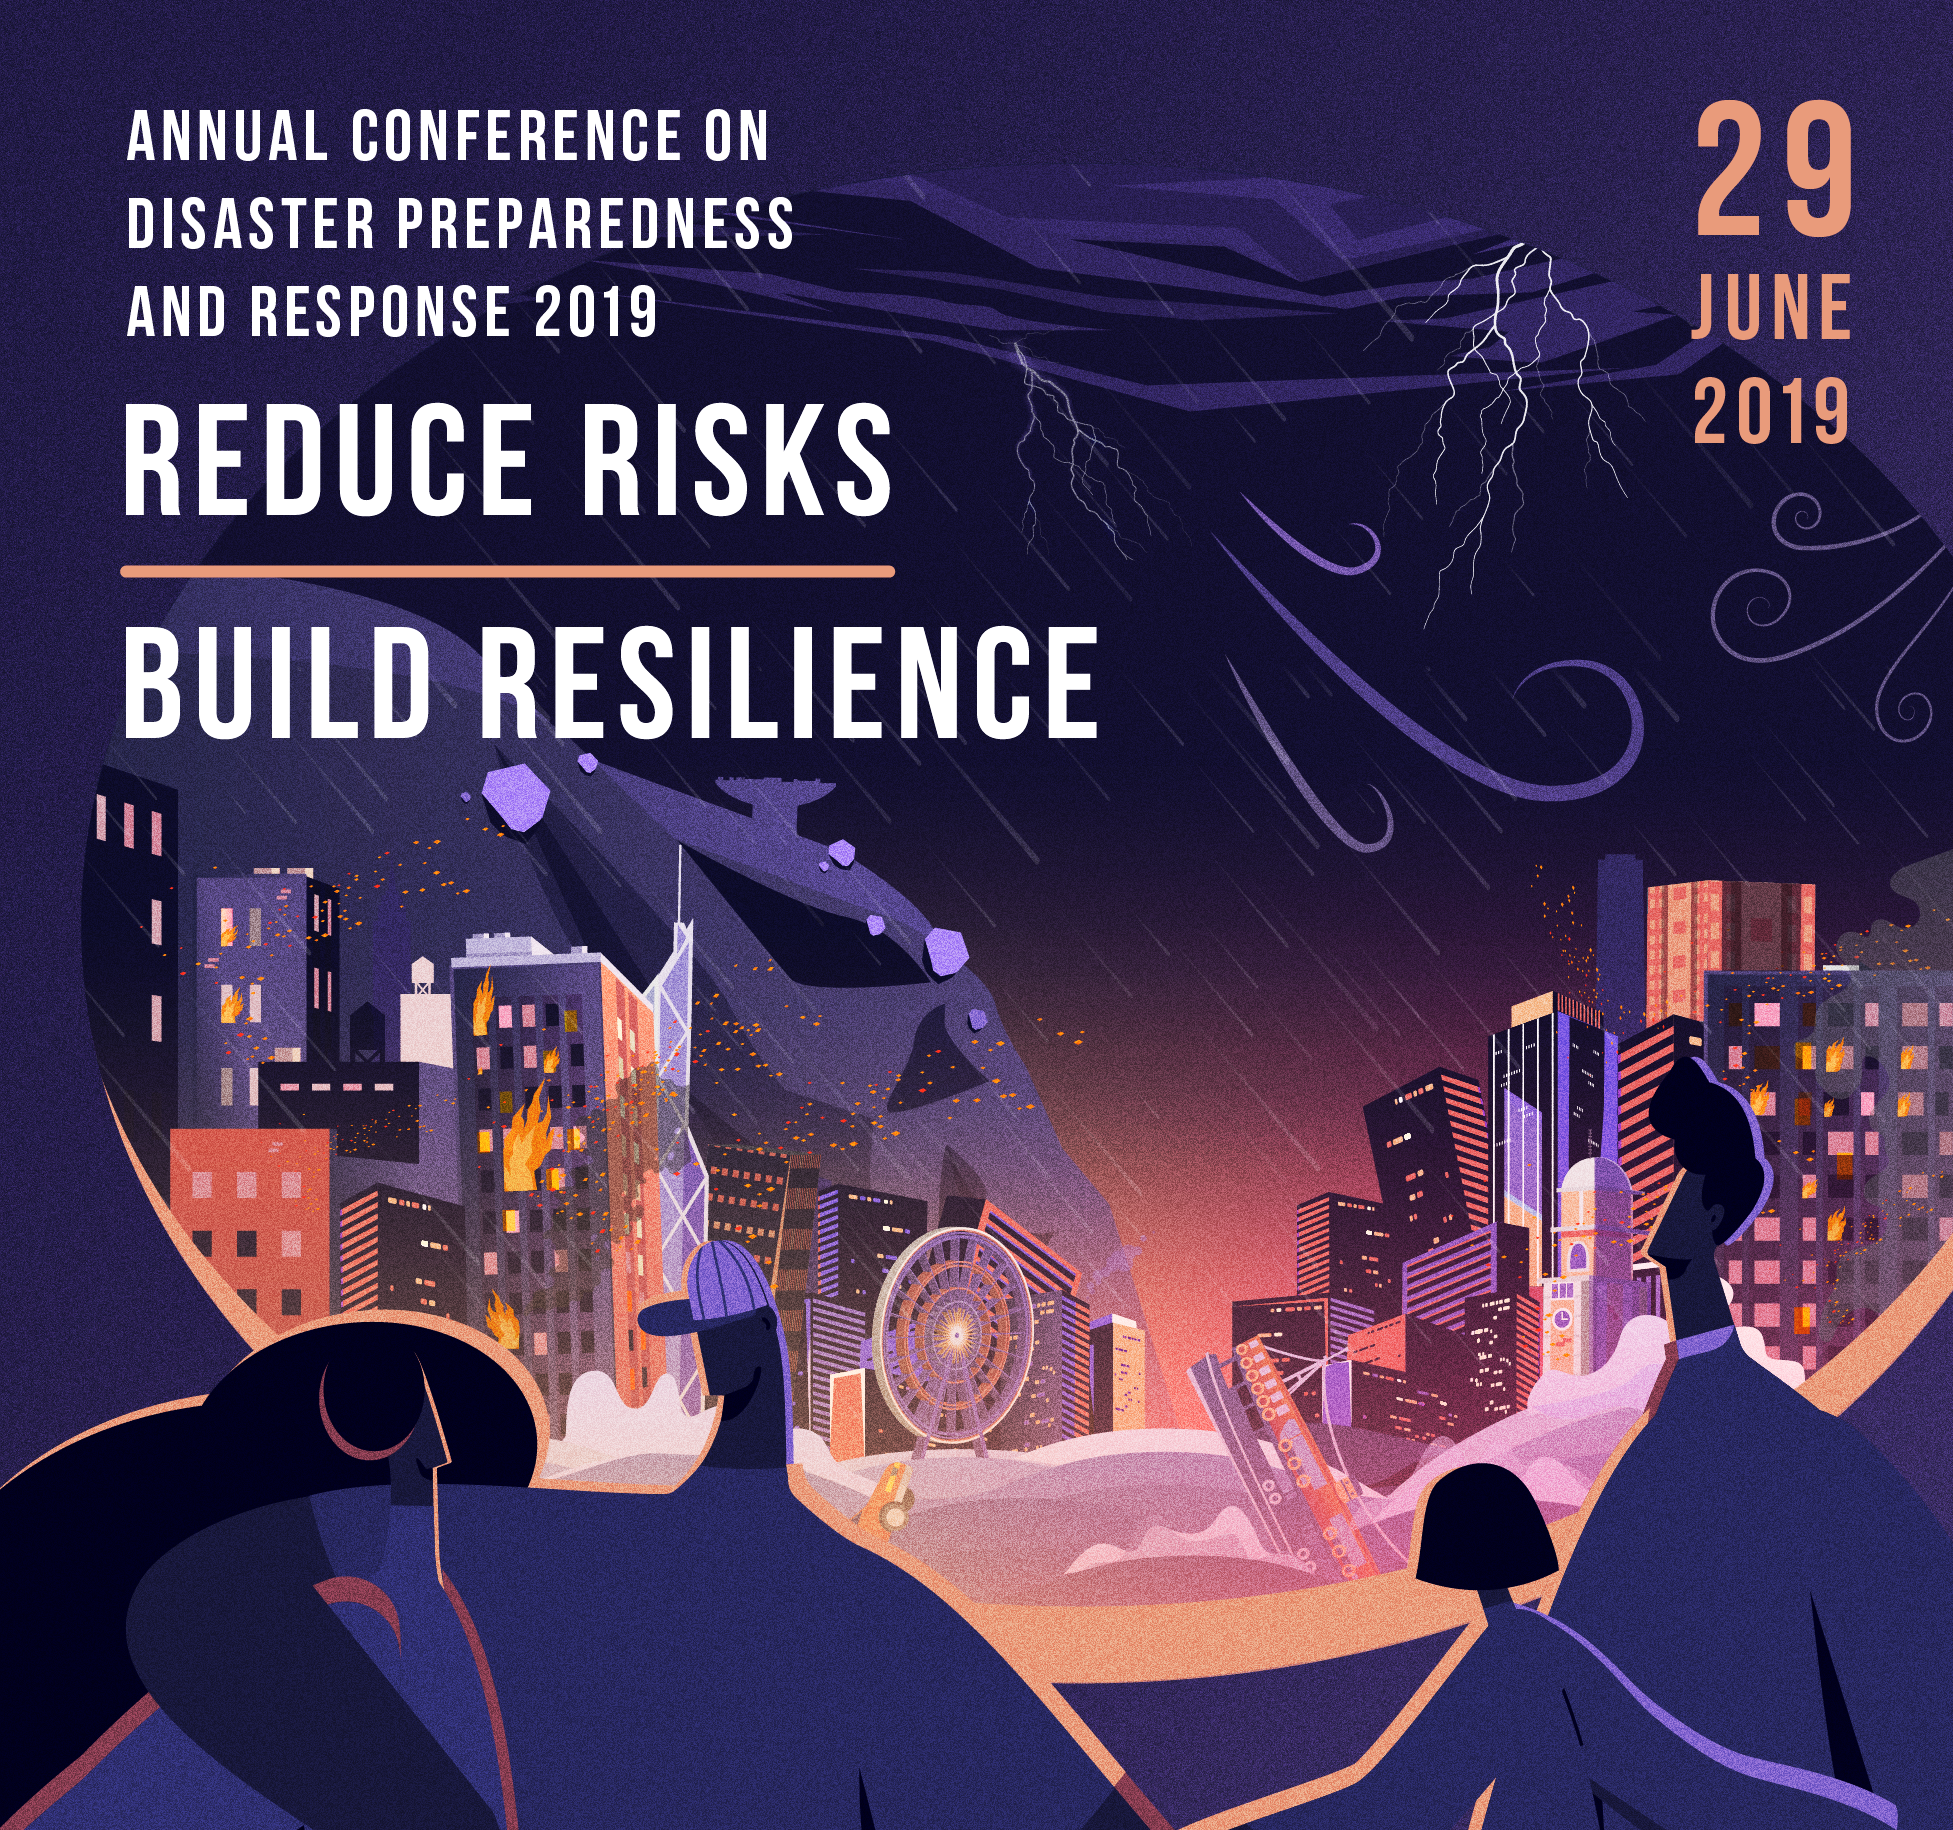 Save the Date for the 4th Annual Conference on Disaster Preparedness and Response 2019